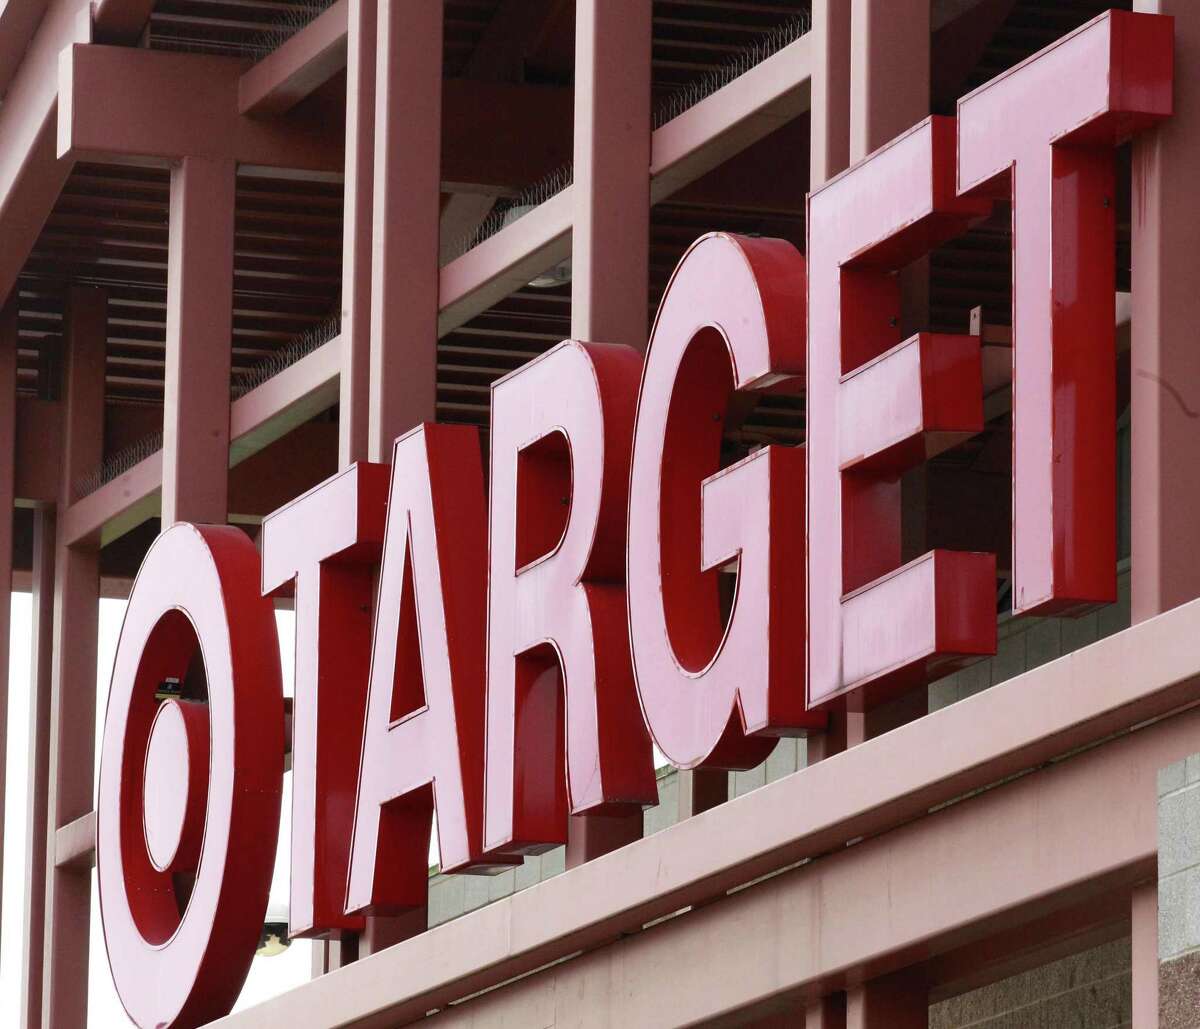 Target announced on June 15, 2015, that it is selling its pharmacy and clinic businesses to the drugstore chain CVS Health for about $1.9 billion in a deal that combines the resources of two retailers seeking to polish their reputations as health care providers.